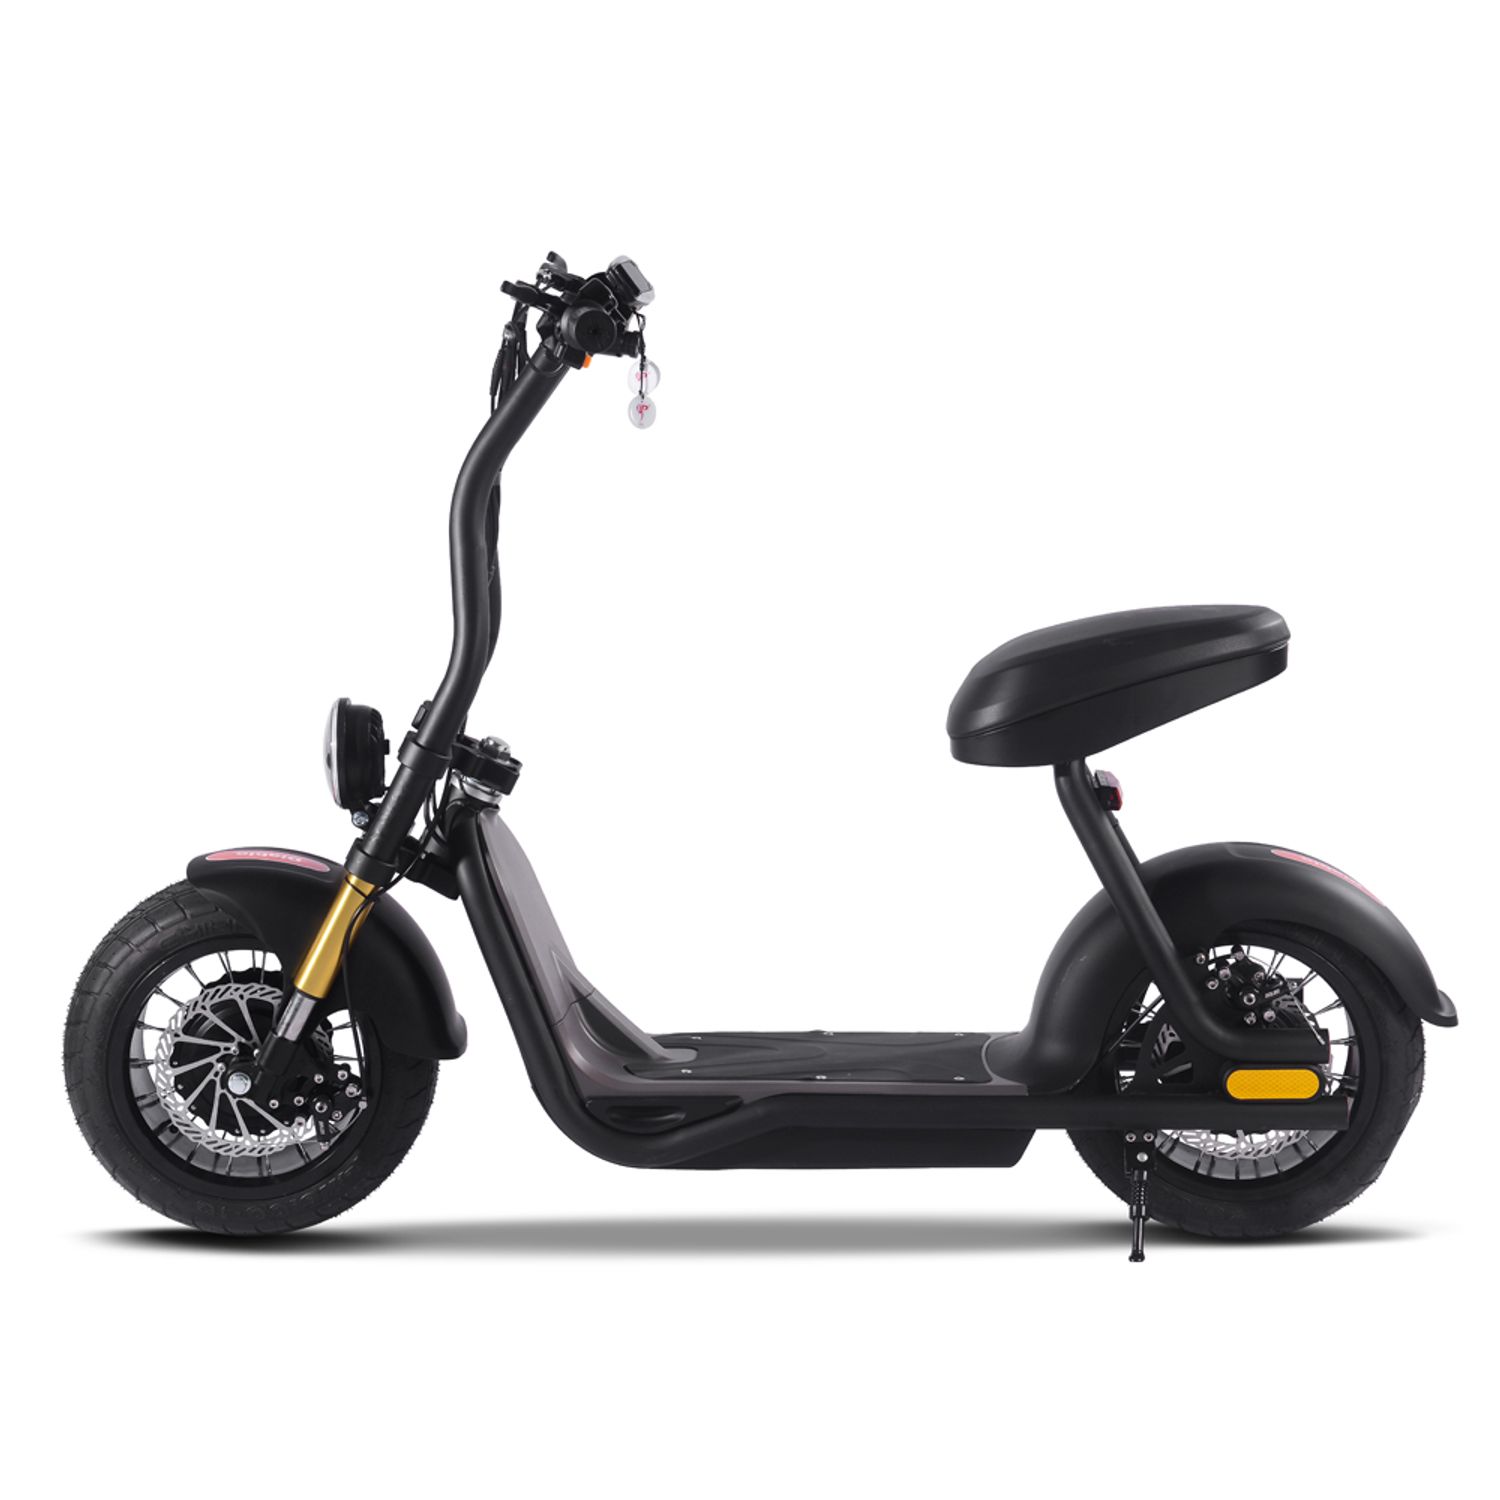 SAY YEAH H10 Black Fat Tire Electic Scooter 1000W 48V  Top speed 25mph  